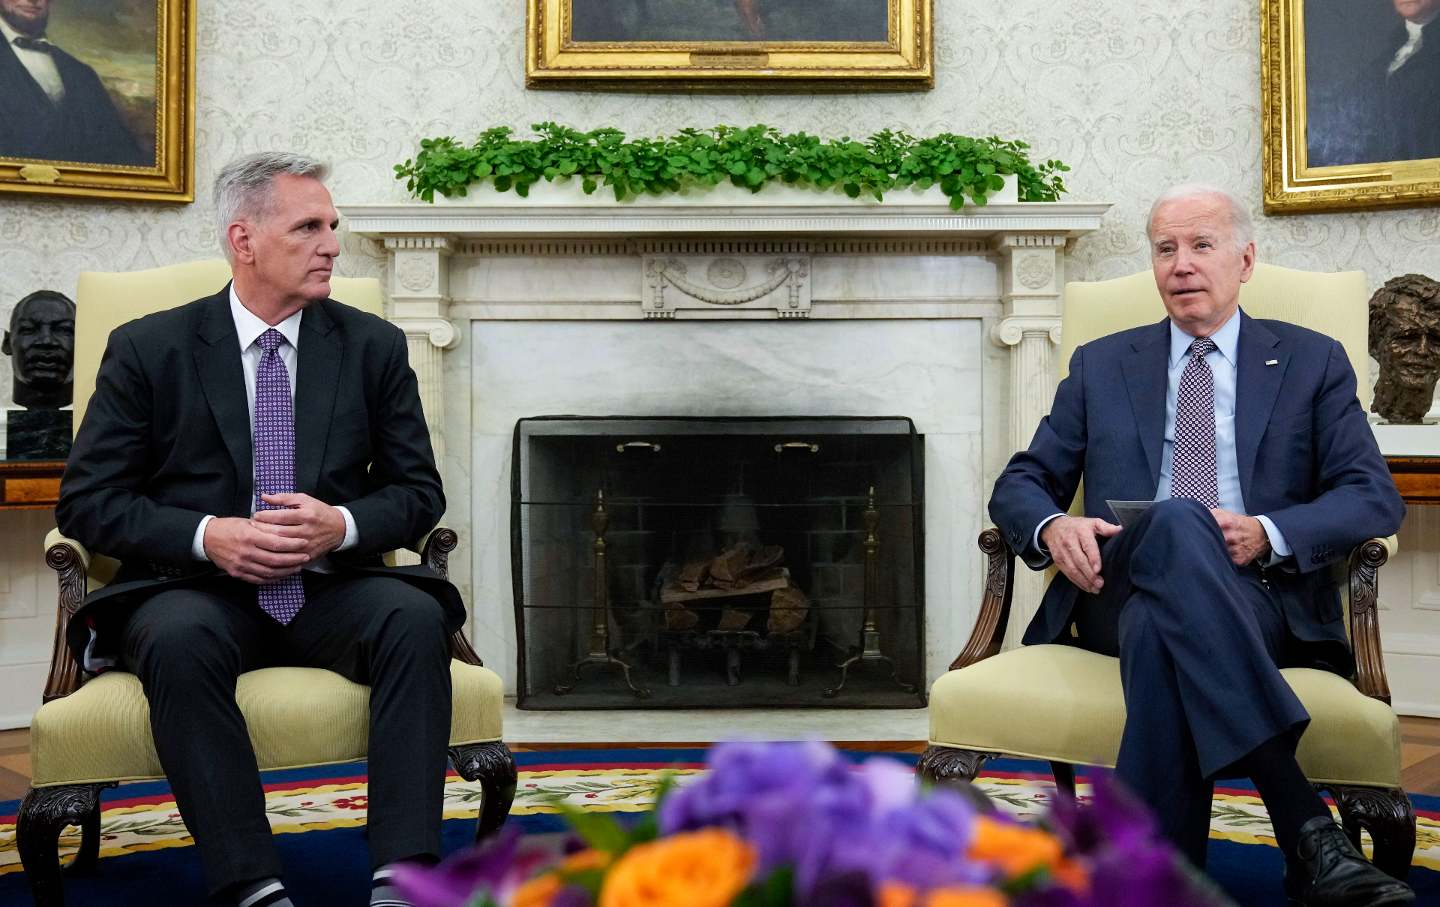 Biden and McCarthy sitting in chairs in the Oval Office